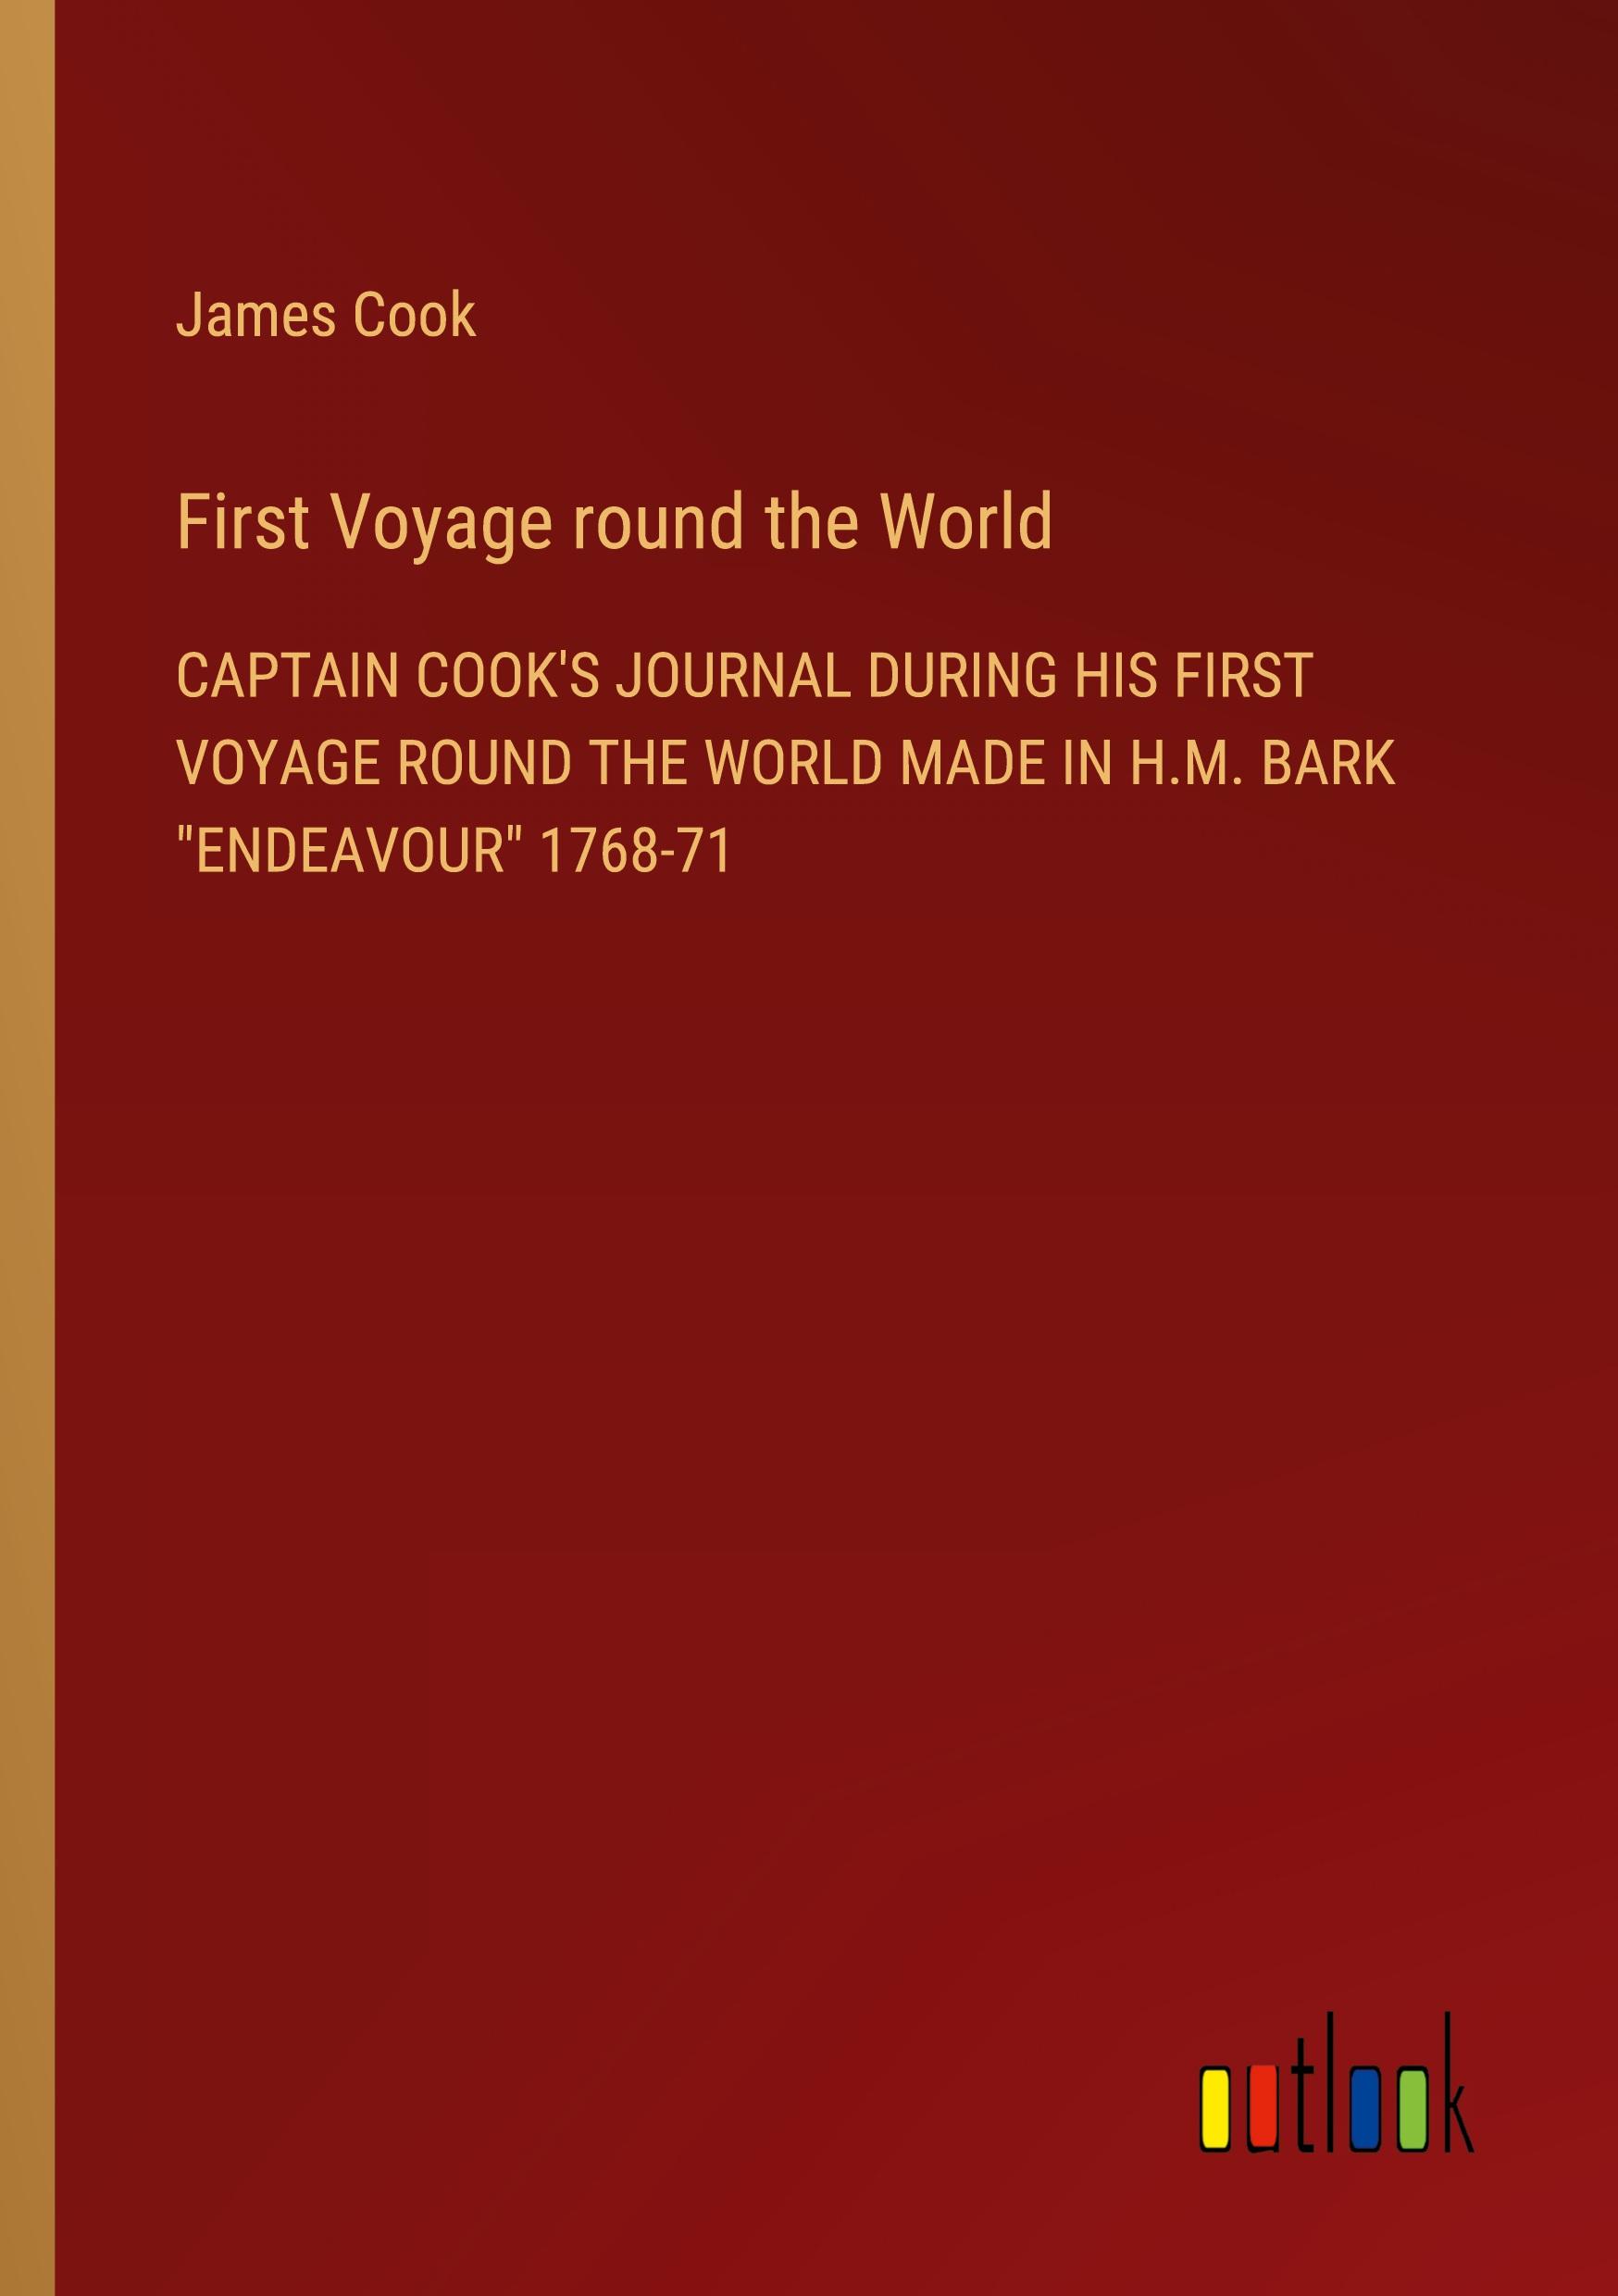 First Voyage round the World / CAPTAIN COOK'S JOURNAL DURING HIS FIRST VOYAGE ROUND THE WORLD MADE IN H.M. BARK 